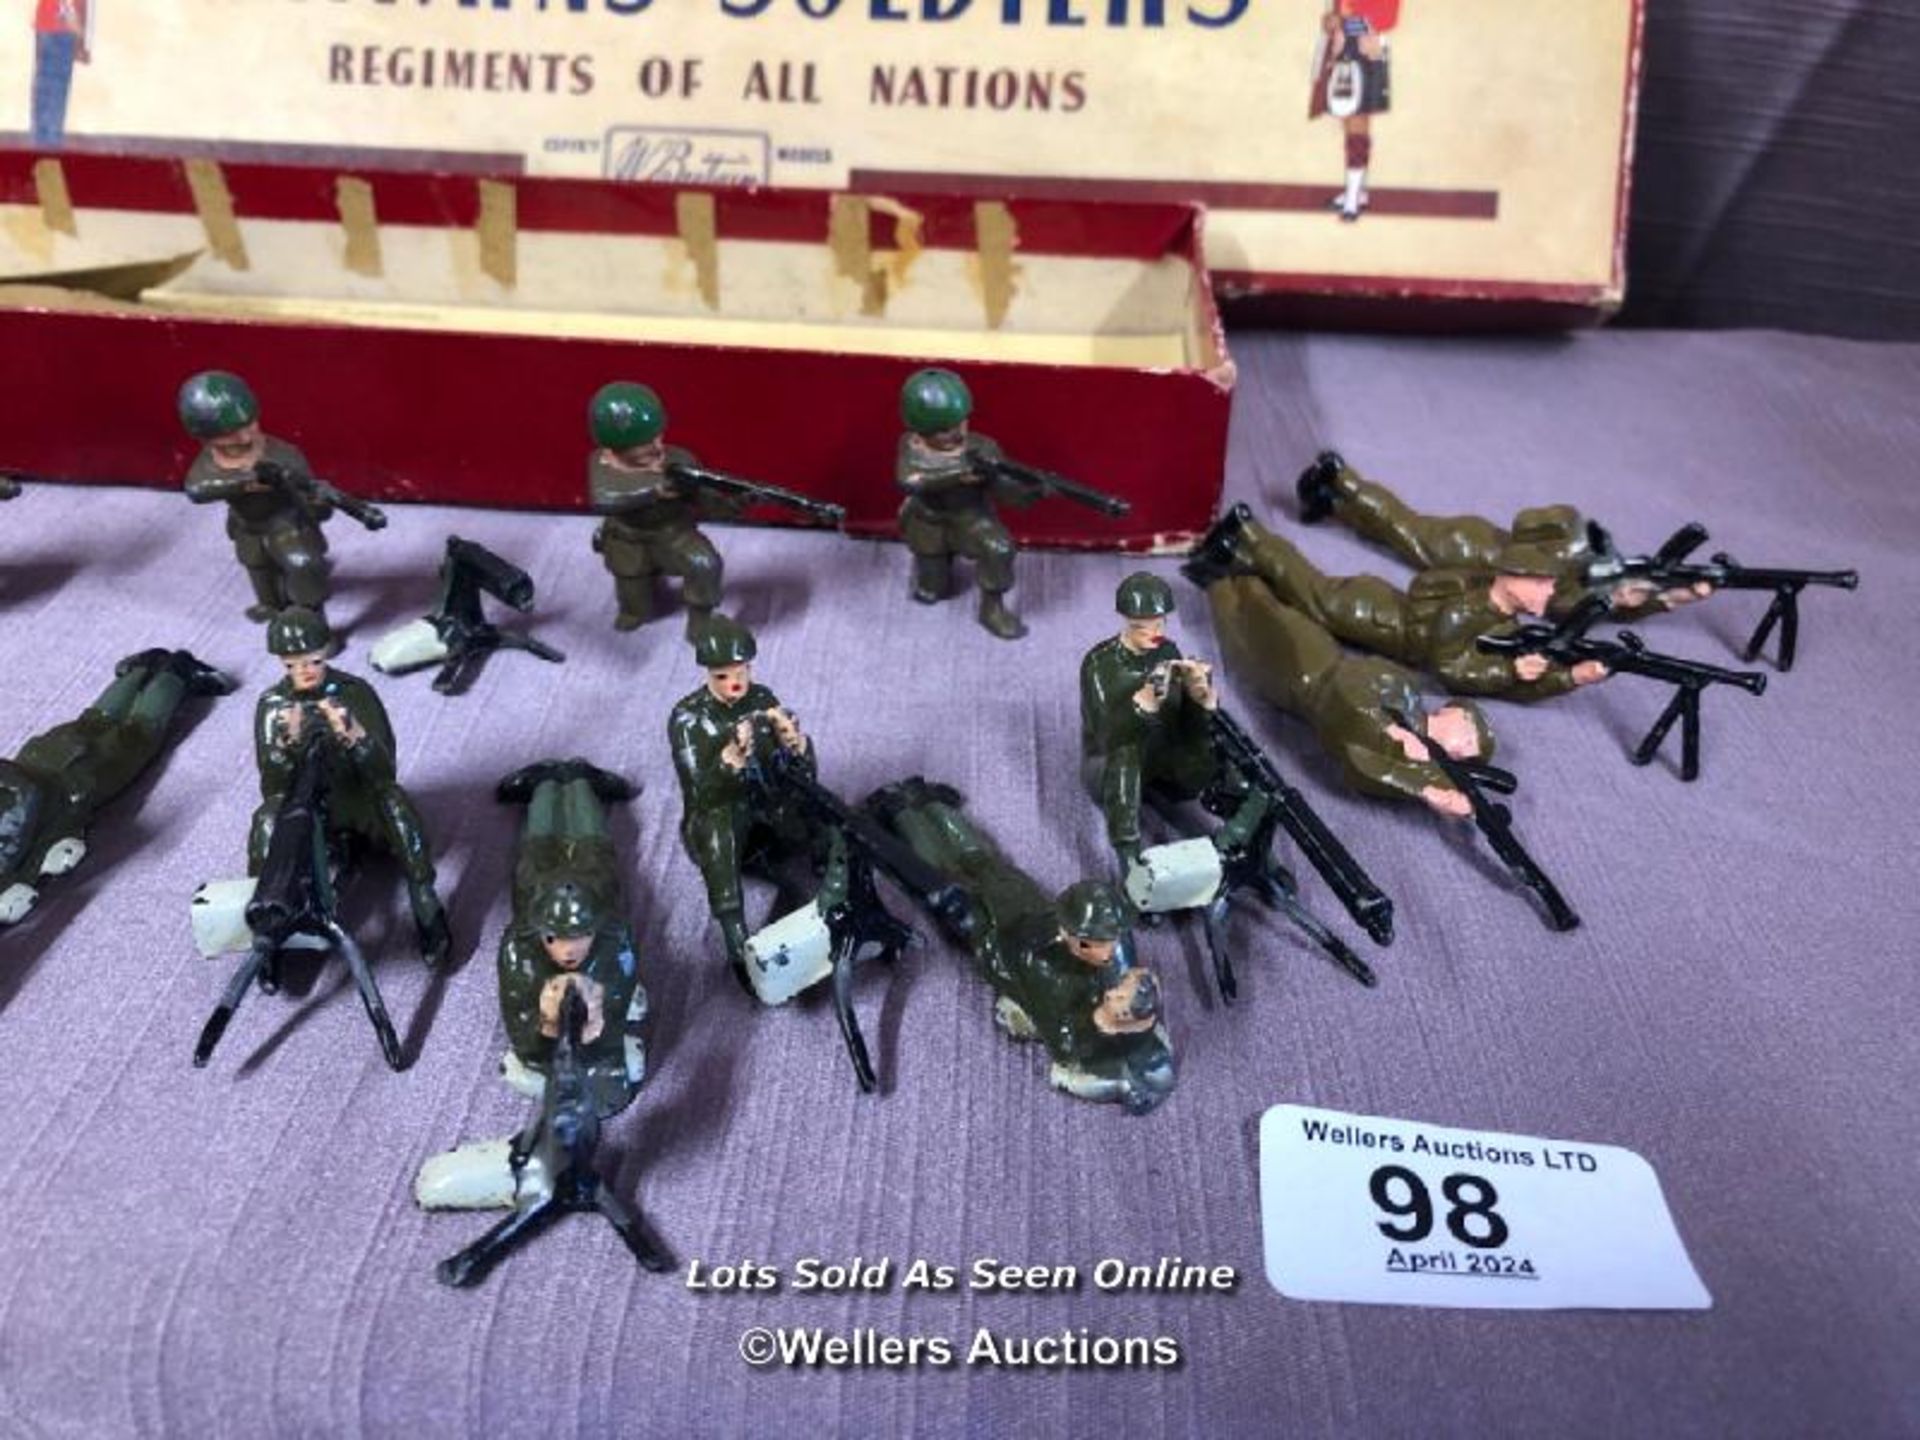 BRITAINS SOLDIERS REGIMENTS OF ALL NATIONS, WITH A NON MATCHING BOX NO. 2063 THE ARGYLL AND - Image 3 of 6